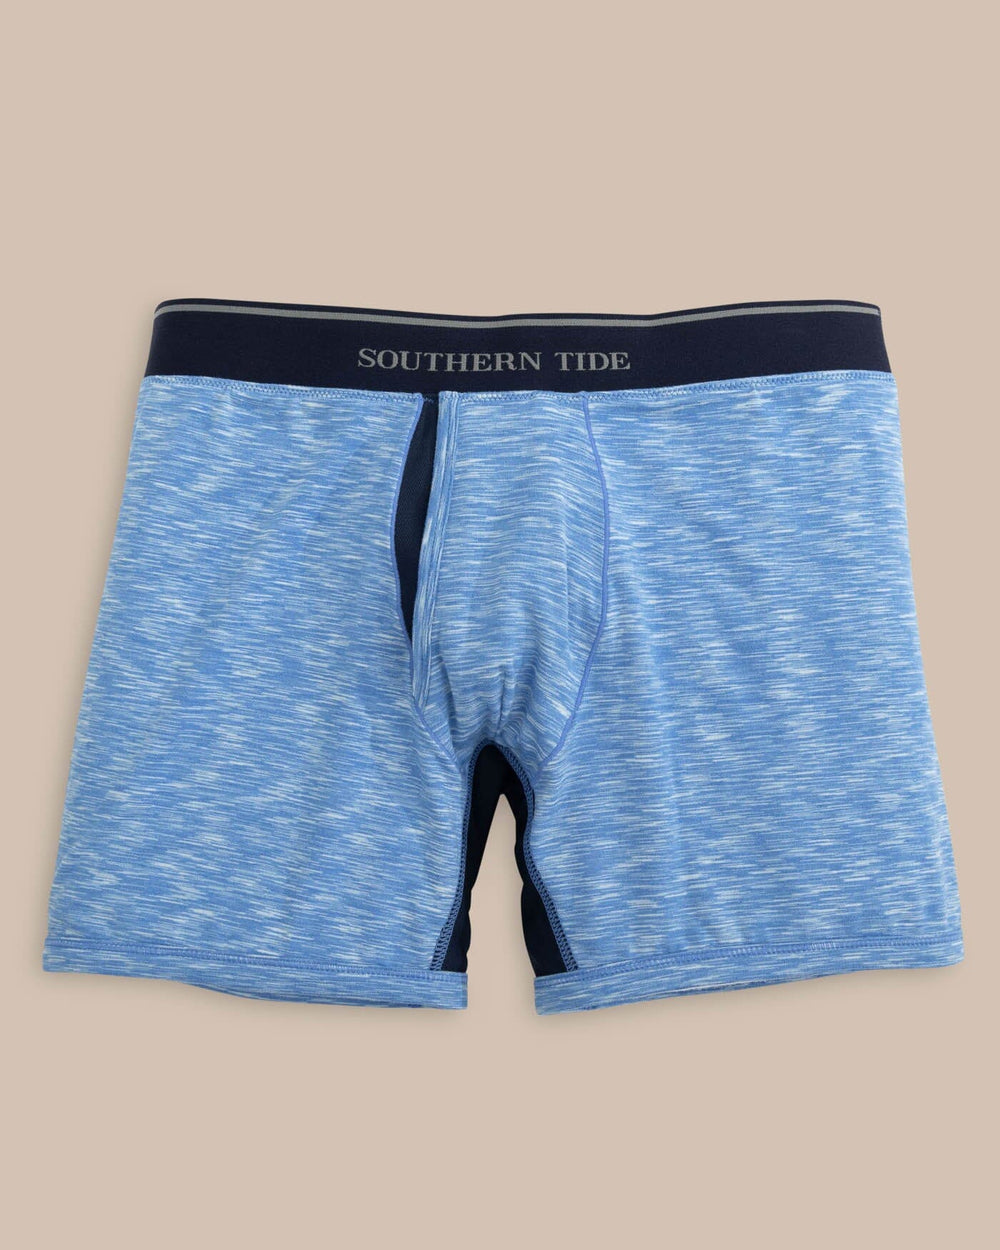 The front of the Men's Baxter Boxer Brief by Southern Tide - Ocean Channel